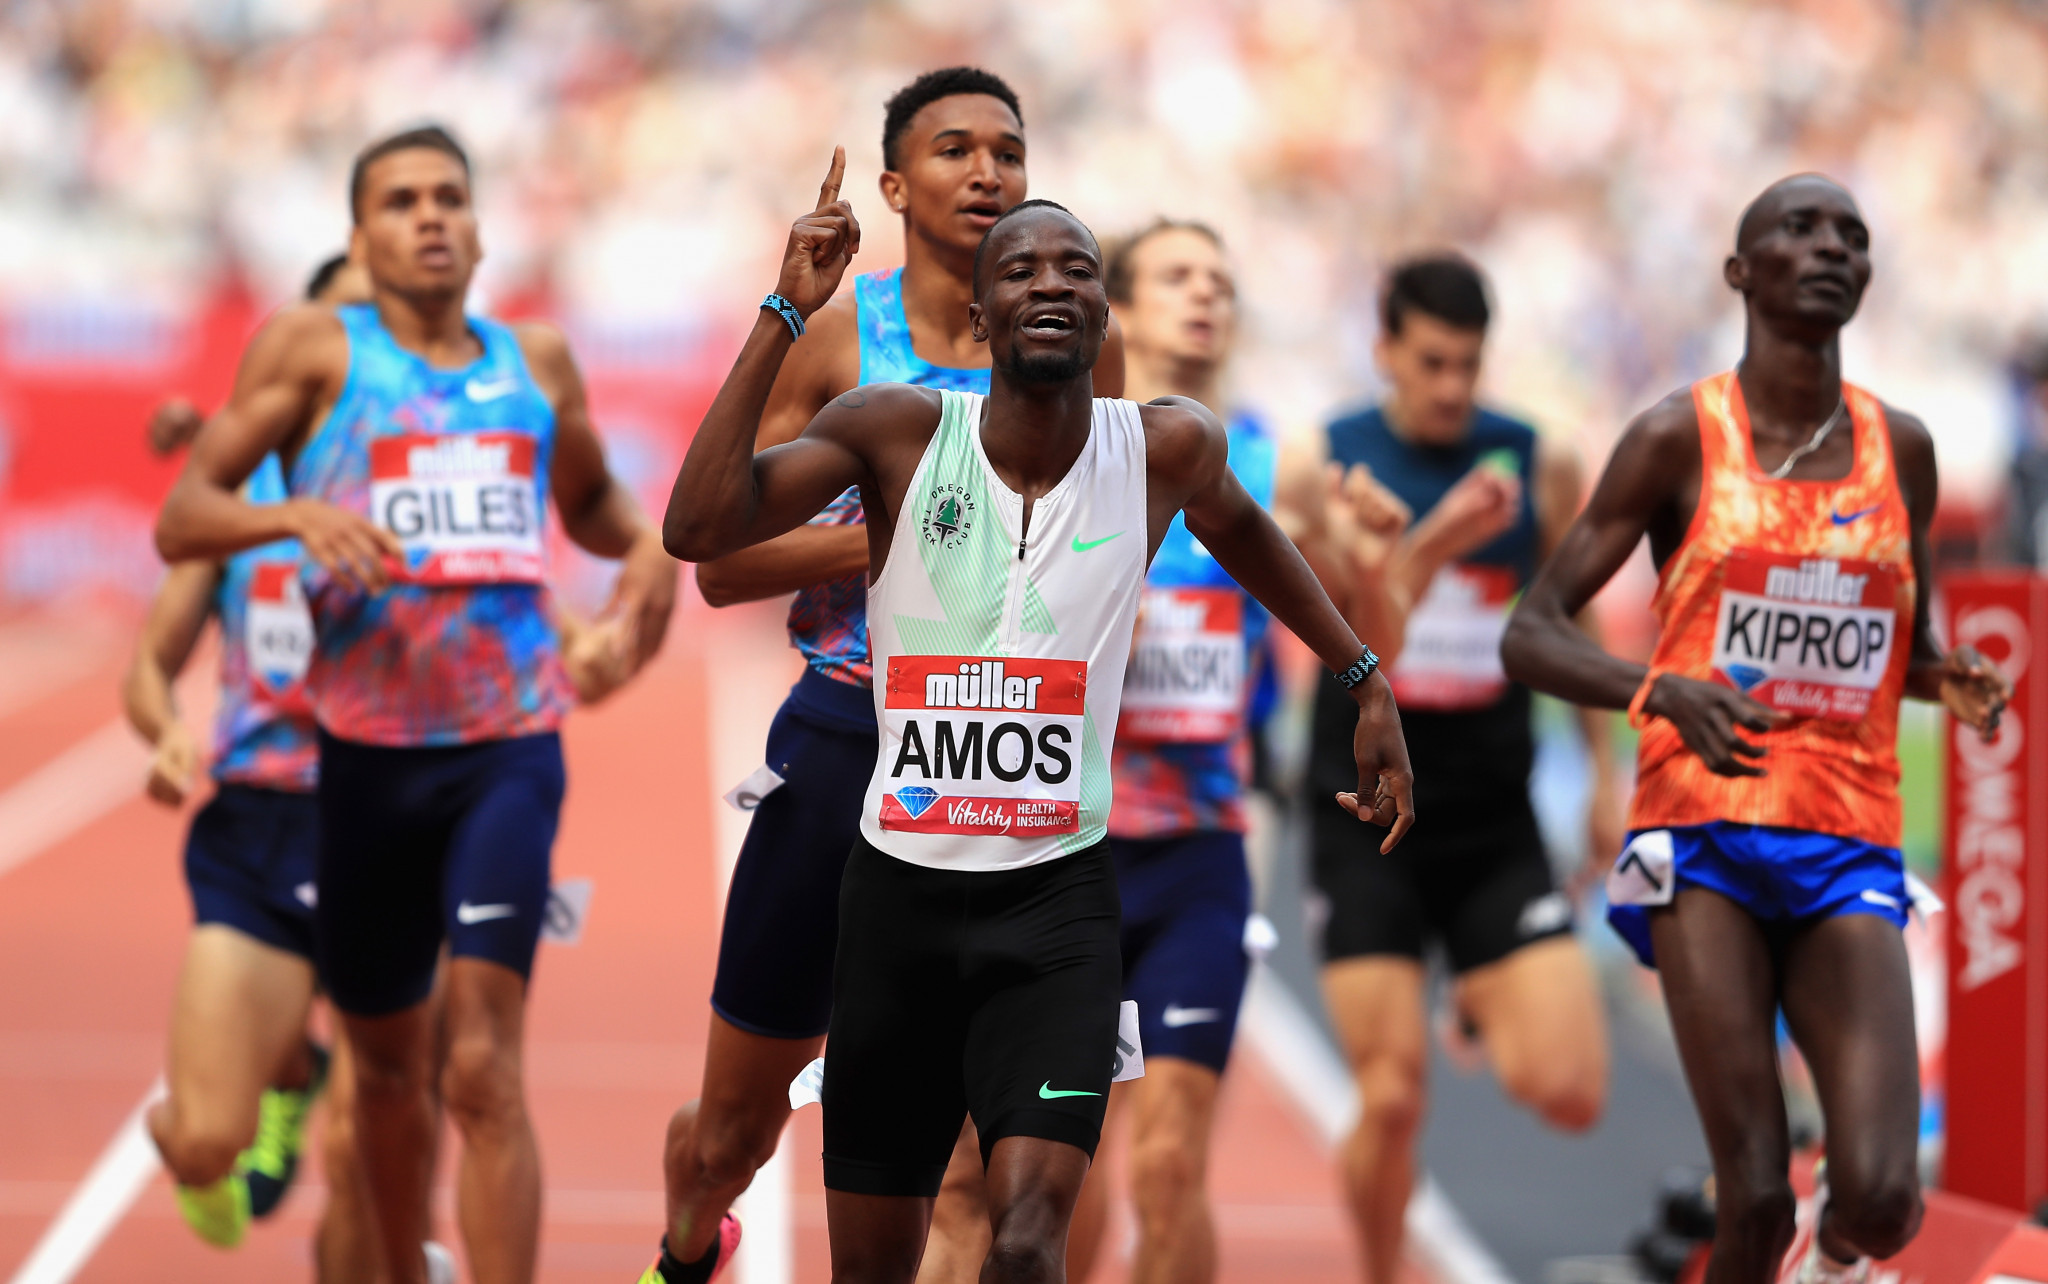 Nijel Amos, a silver medallist in the men's 800 metres at London 2012, will hope to win another medal for his country at Tokyo 2020 ©Getty Images